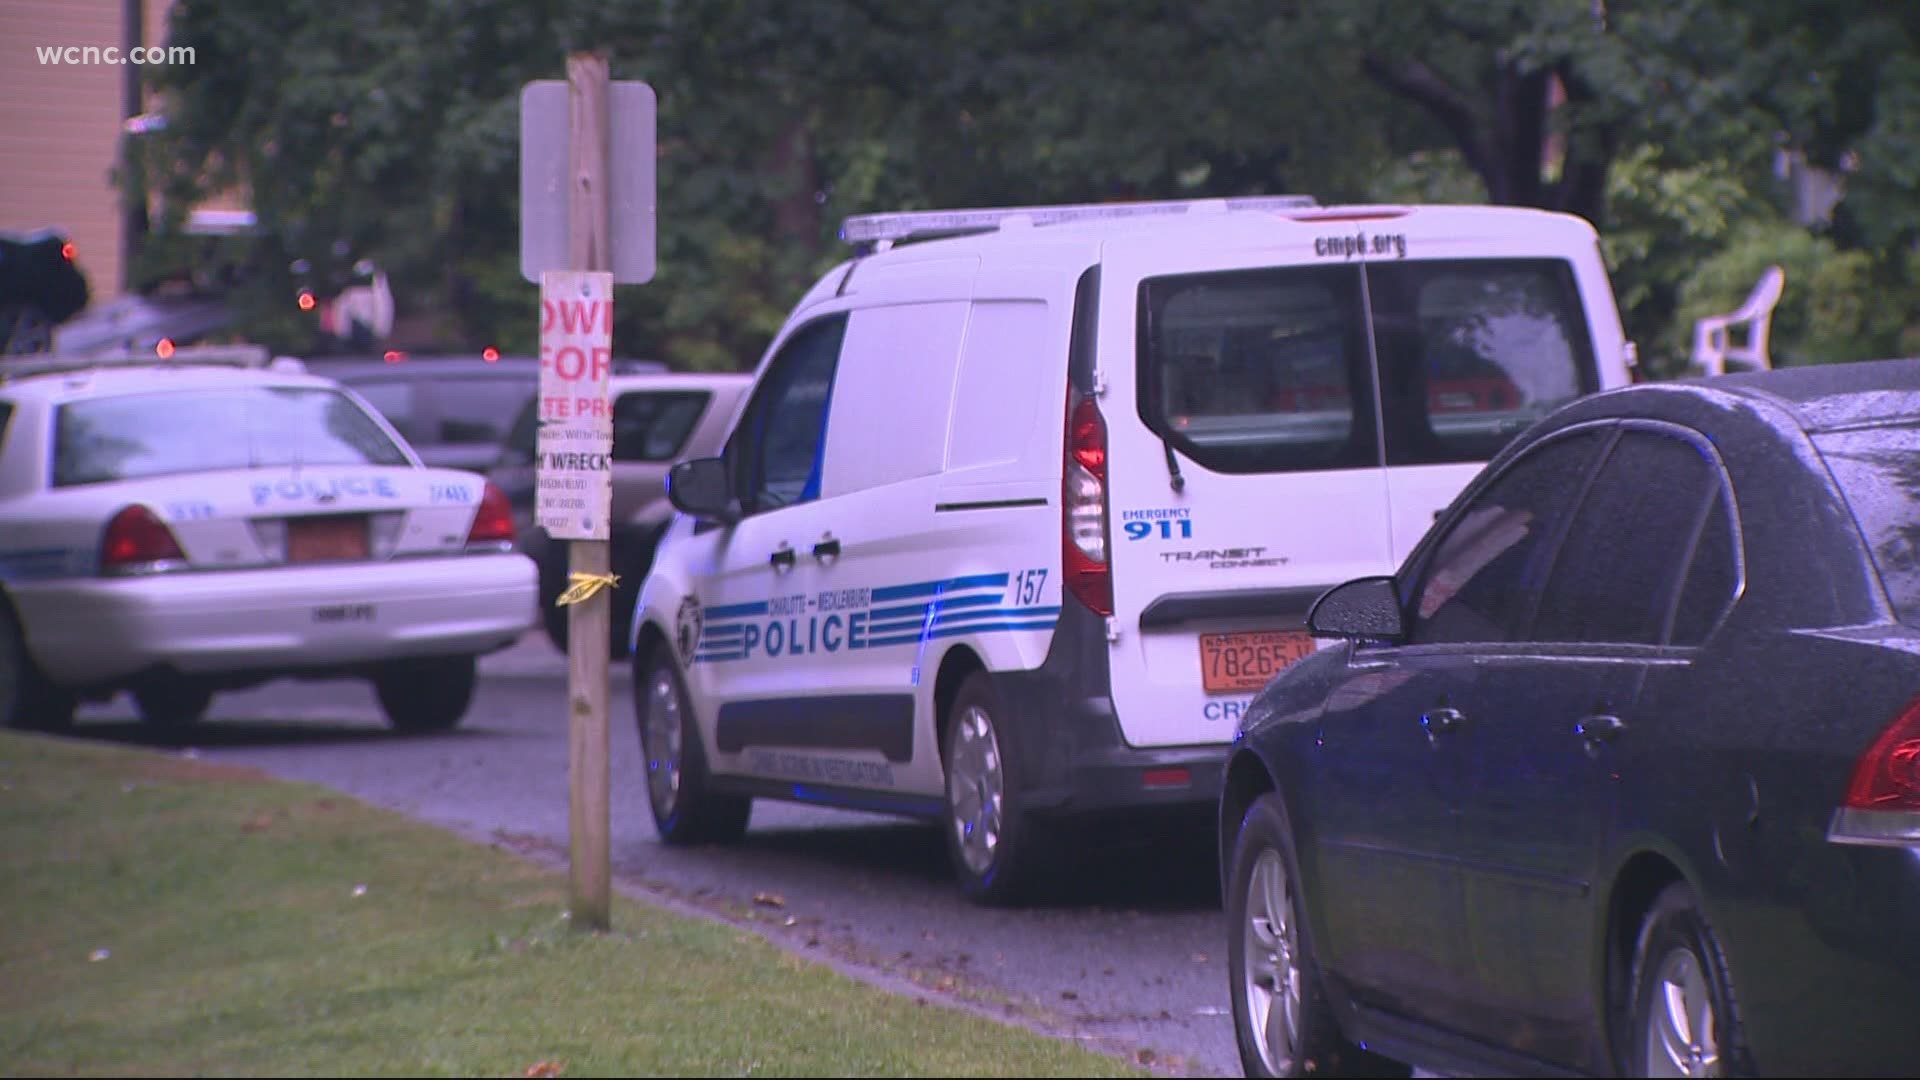 A 15-year-old boy was killed after being shot in the parking lot of an apartment complex in east Charlotte Monday afternoon, police said.